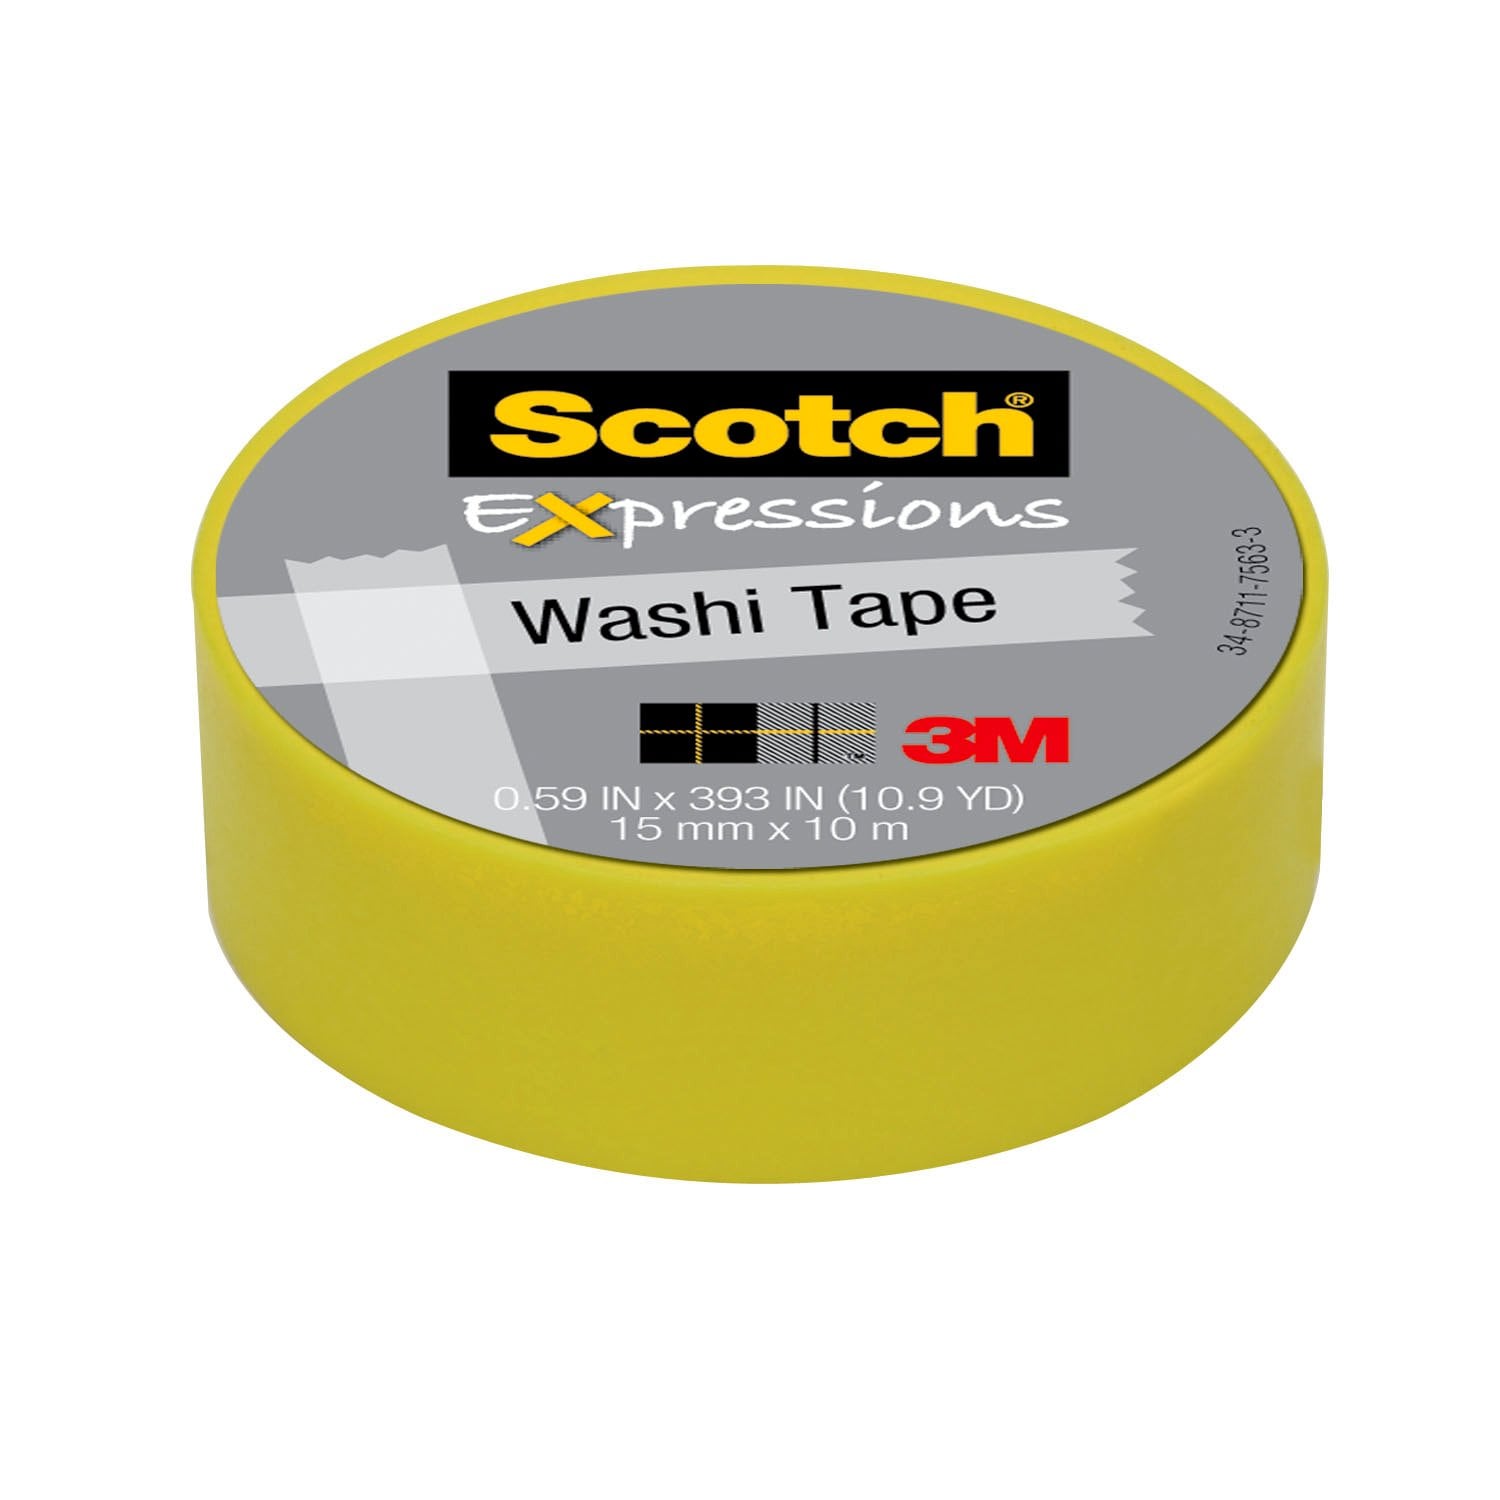 7100024029 - Scotch Expressions Washi Tape C314-GRN2, 0.59 in x 393 in (15 mm x 10
m) Pastel Green